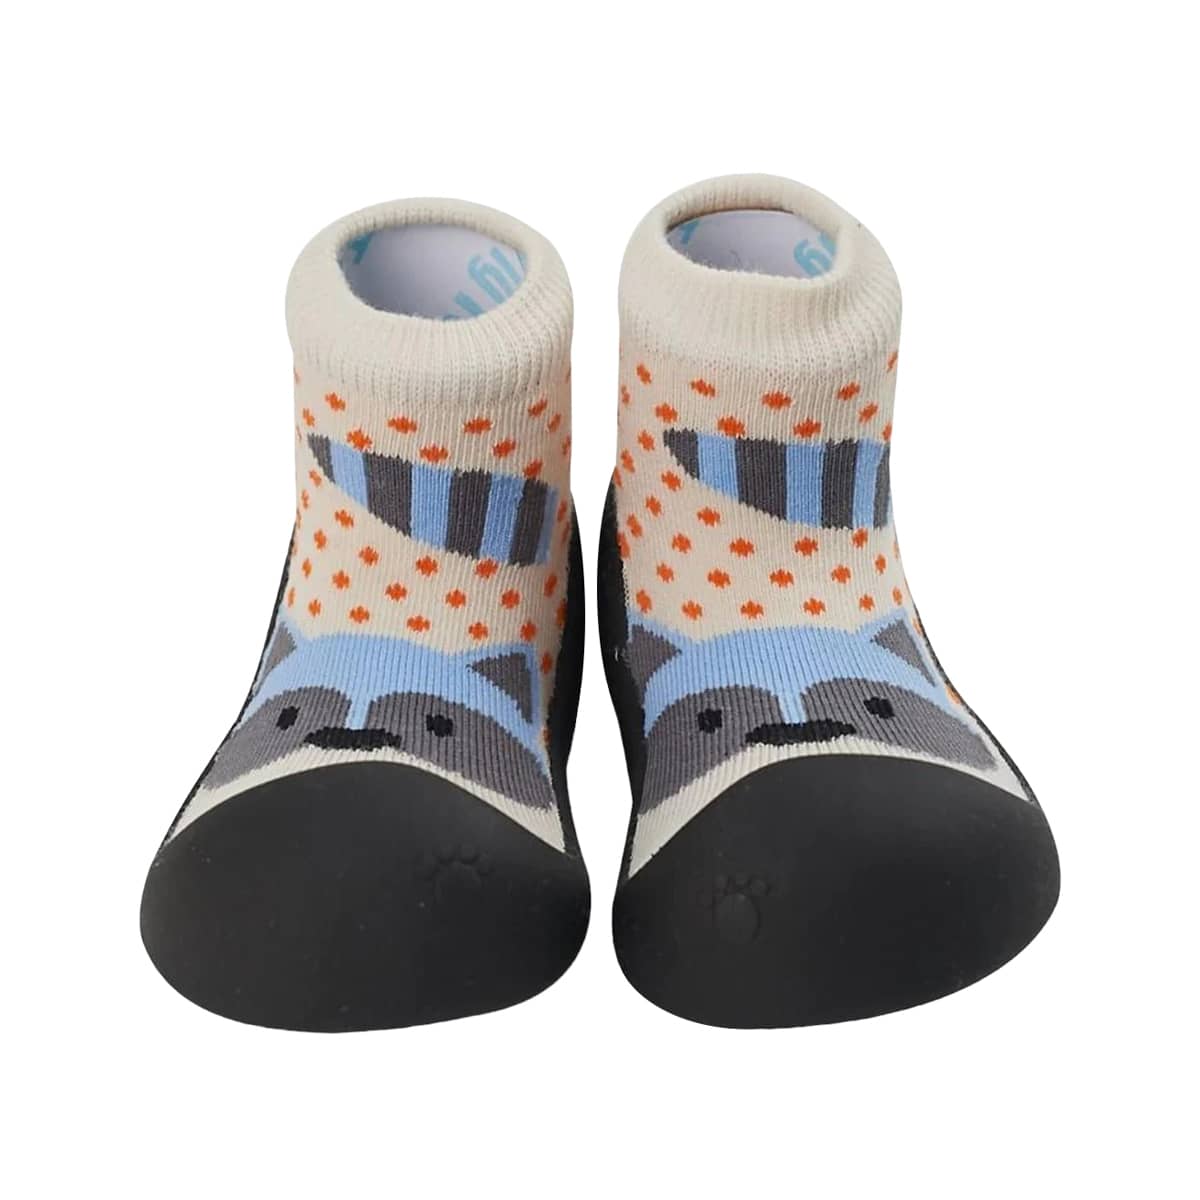 BigToes First Walker Shoes - Raccoon Tail